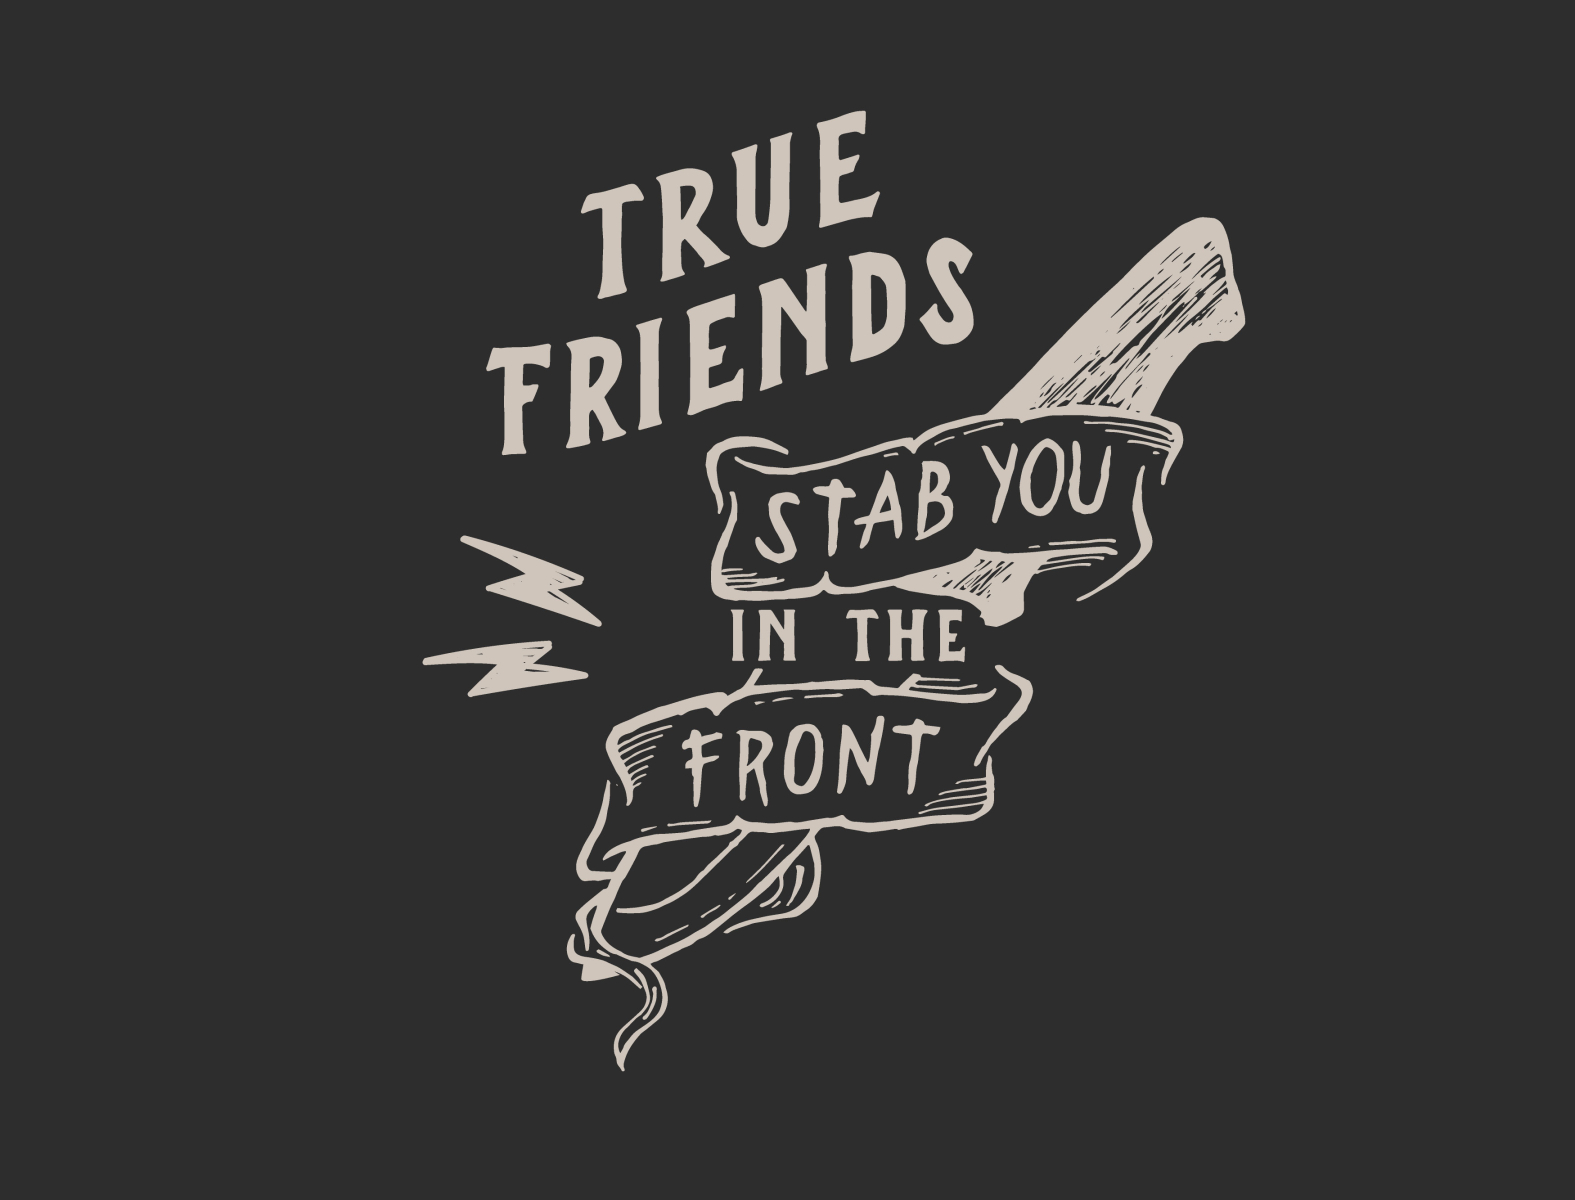 True Friends Stab You in the Front by rvldimuhammad on Dribbble